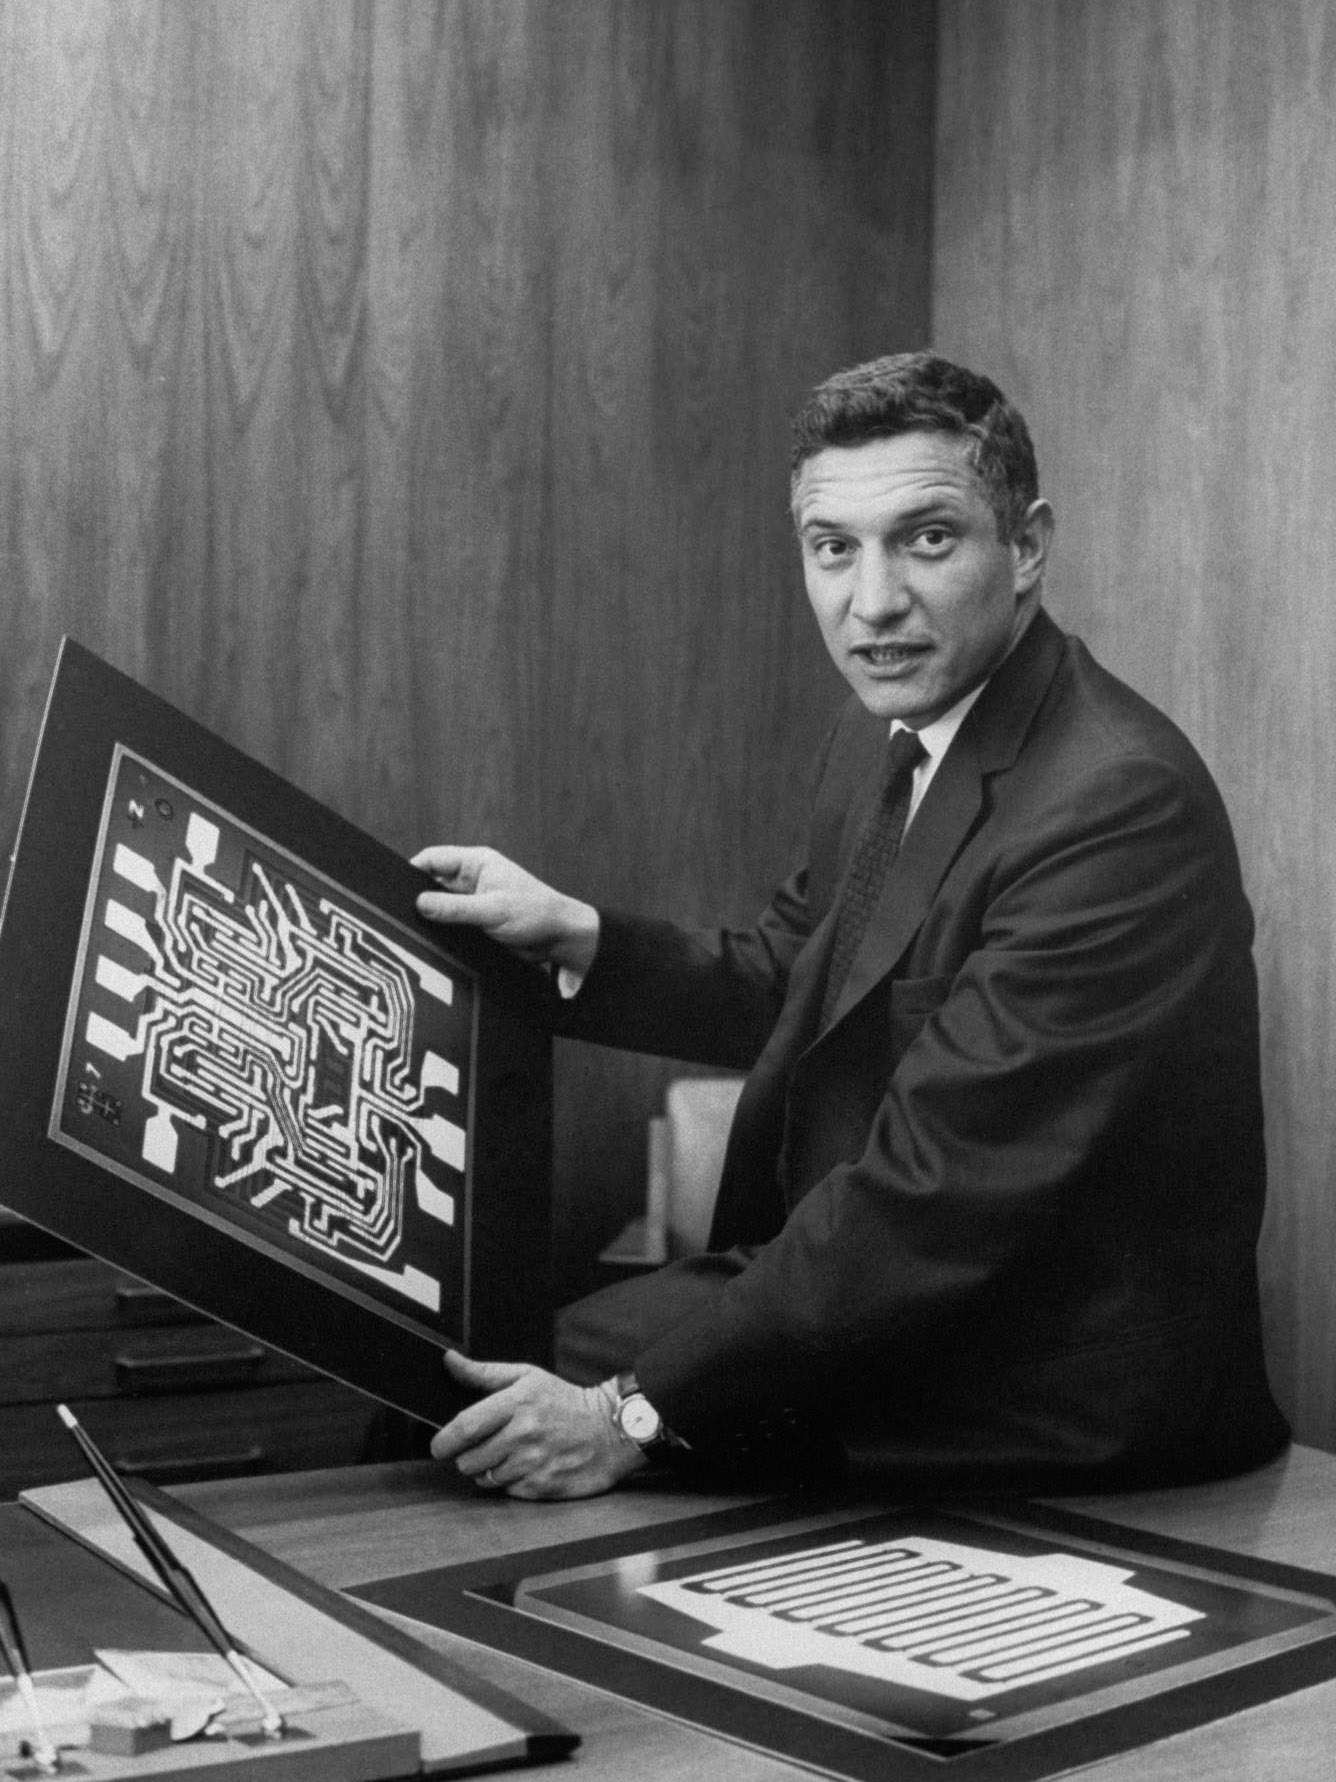 Fairchild Semiconductor division head Robert Noyce speaking in serious portrait in his office, w. diagrams of semiconductors & microchips. (Photo by Ted Streshinsky/Getty Images)